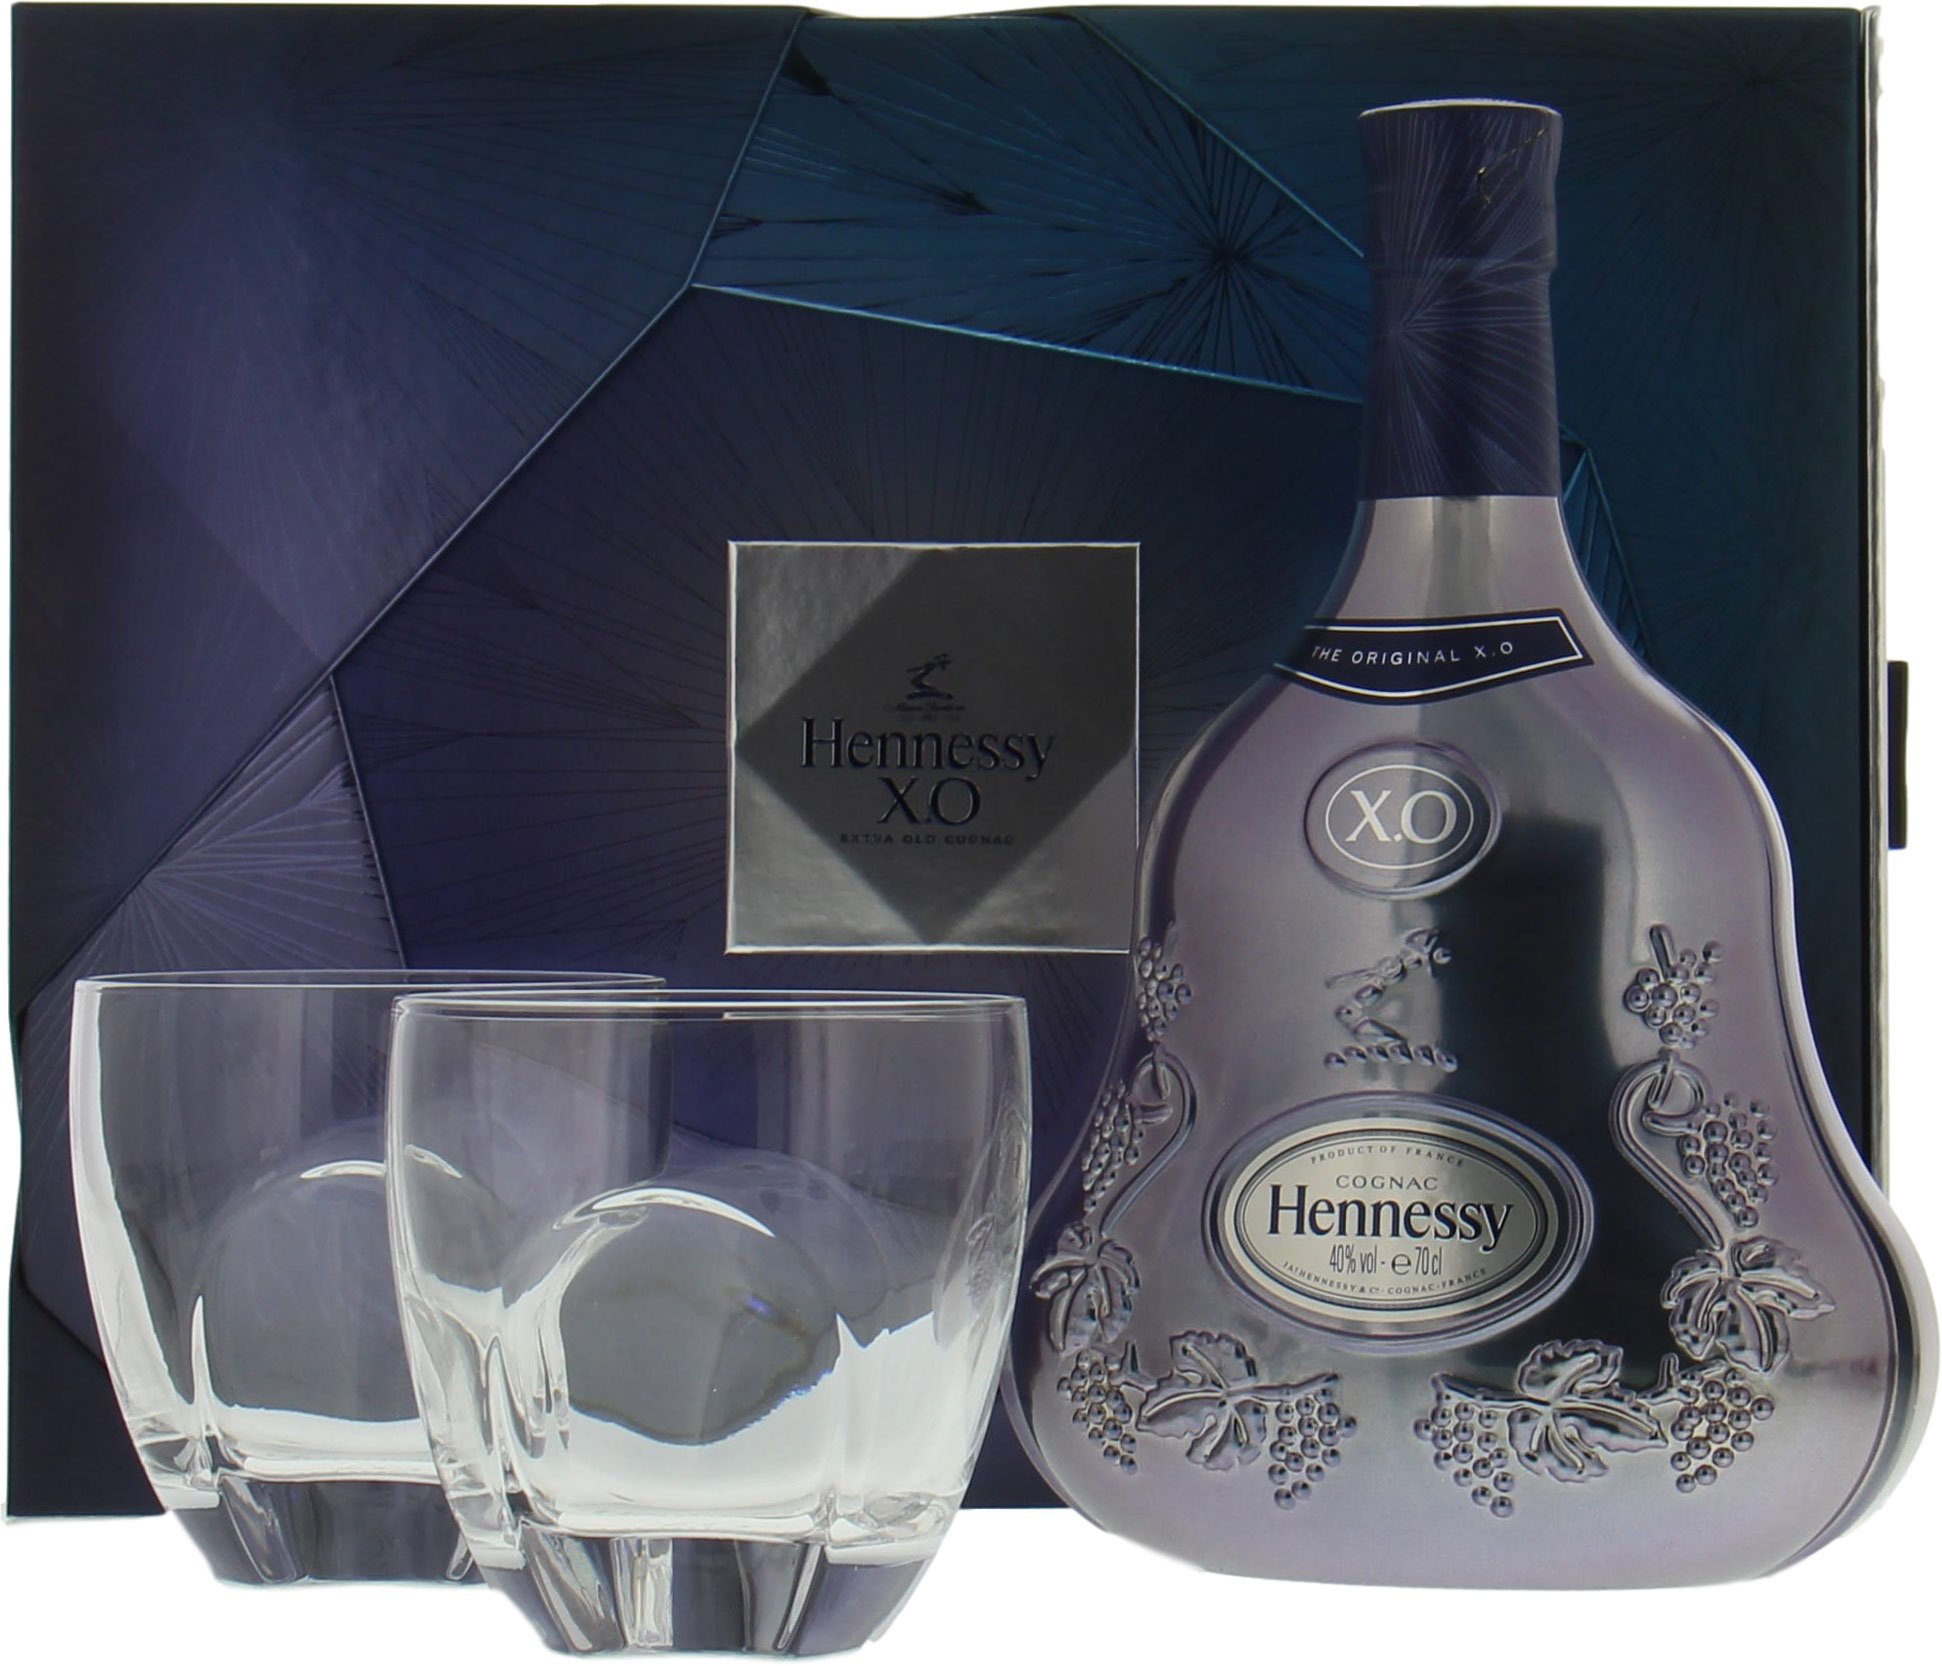 Hennessy - XO Limited Edition Experience coffret with 2 glasses (release 2017) NV Perfect